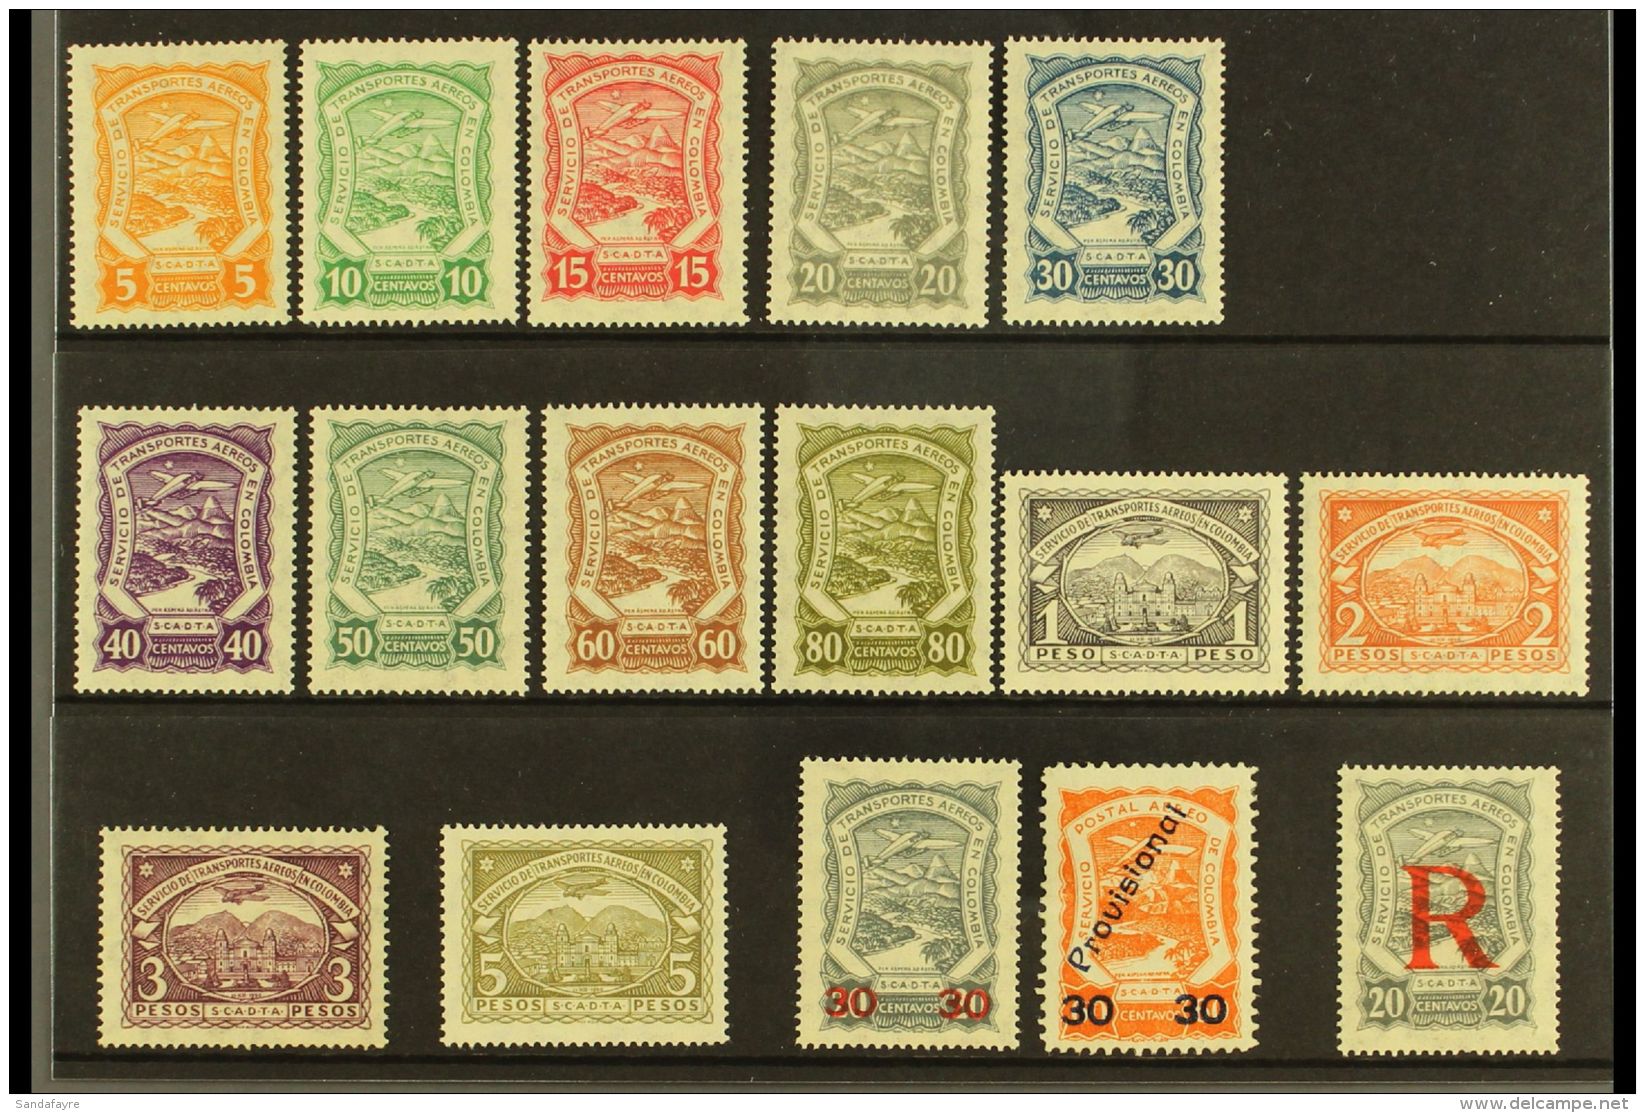 SCADTA 1923 FINE MINT COLLECTION On A Stock Card. Includes 1923-28 "Plane Over Magdalena River" Complete Set, 1923... - Colombia